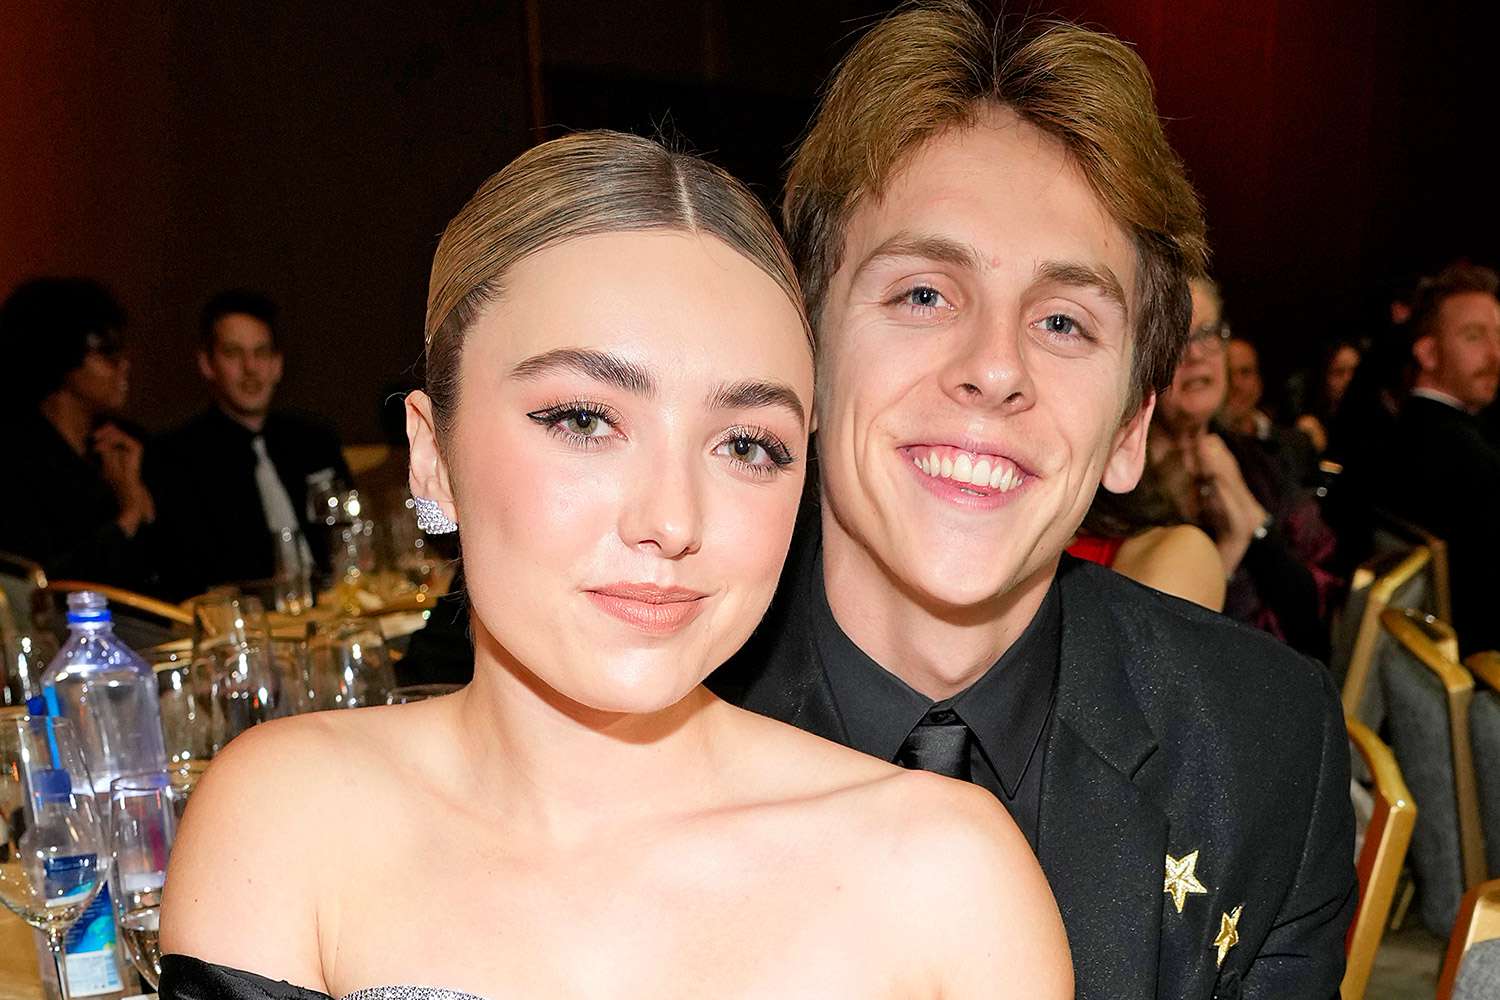 Cobra Kai's Jacob Bertrand Says Working with Girlfriend Peyton List Was 'Such a Blessing': 'My Best Friend' (Exclusive)